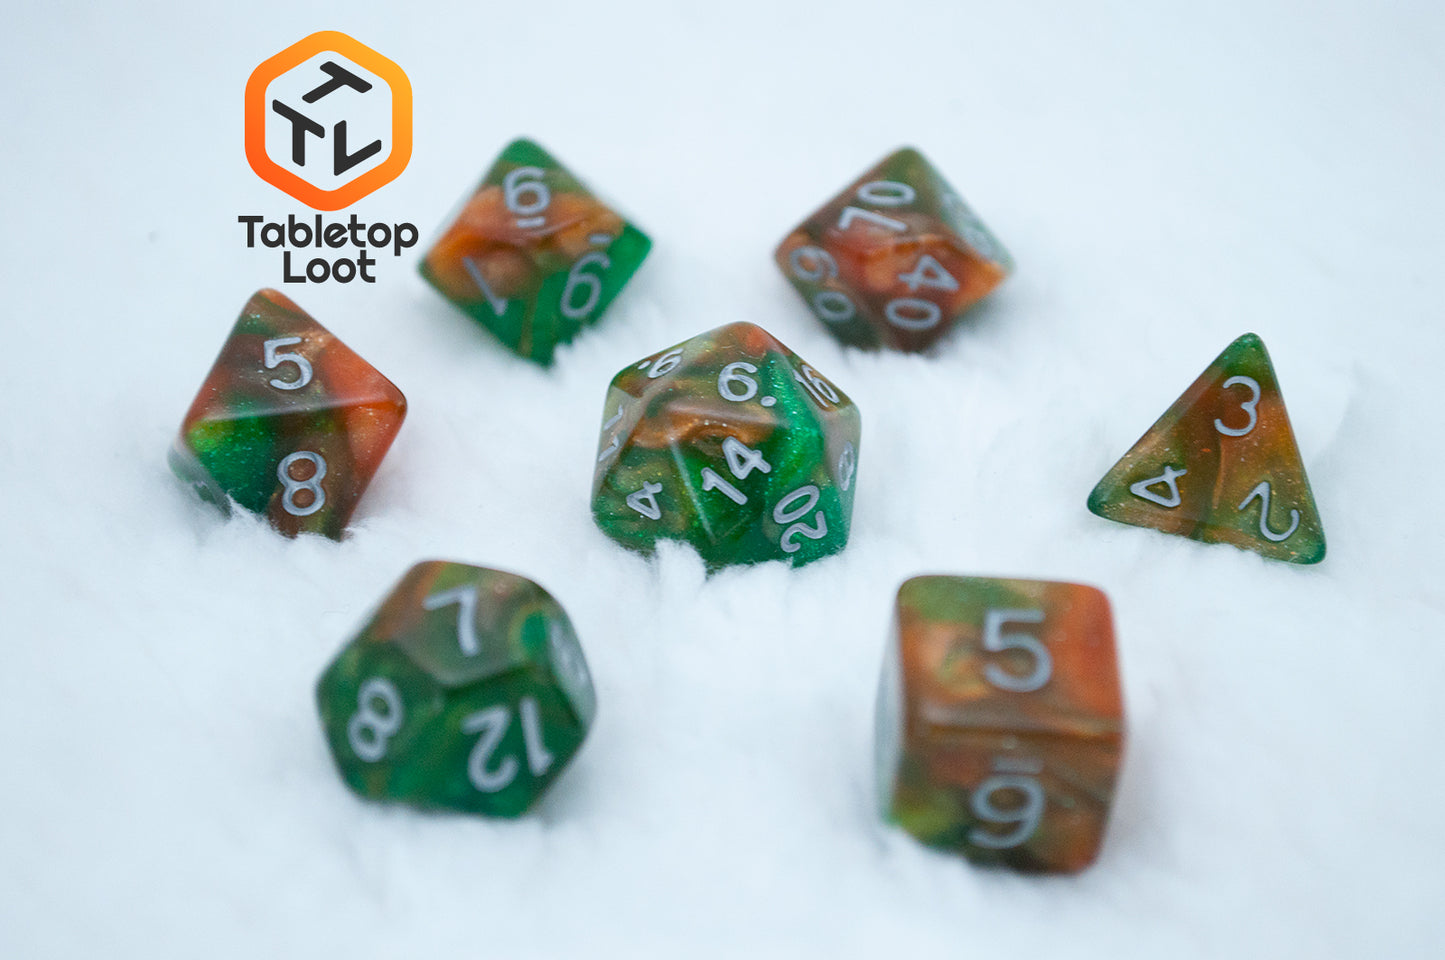 The Emerald Vale 7 piece dice set from Tabletop Loot with swirls of orange in green resin, lots of sparkle, and white numbering.